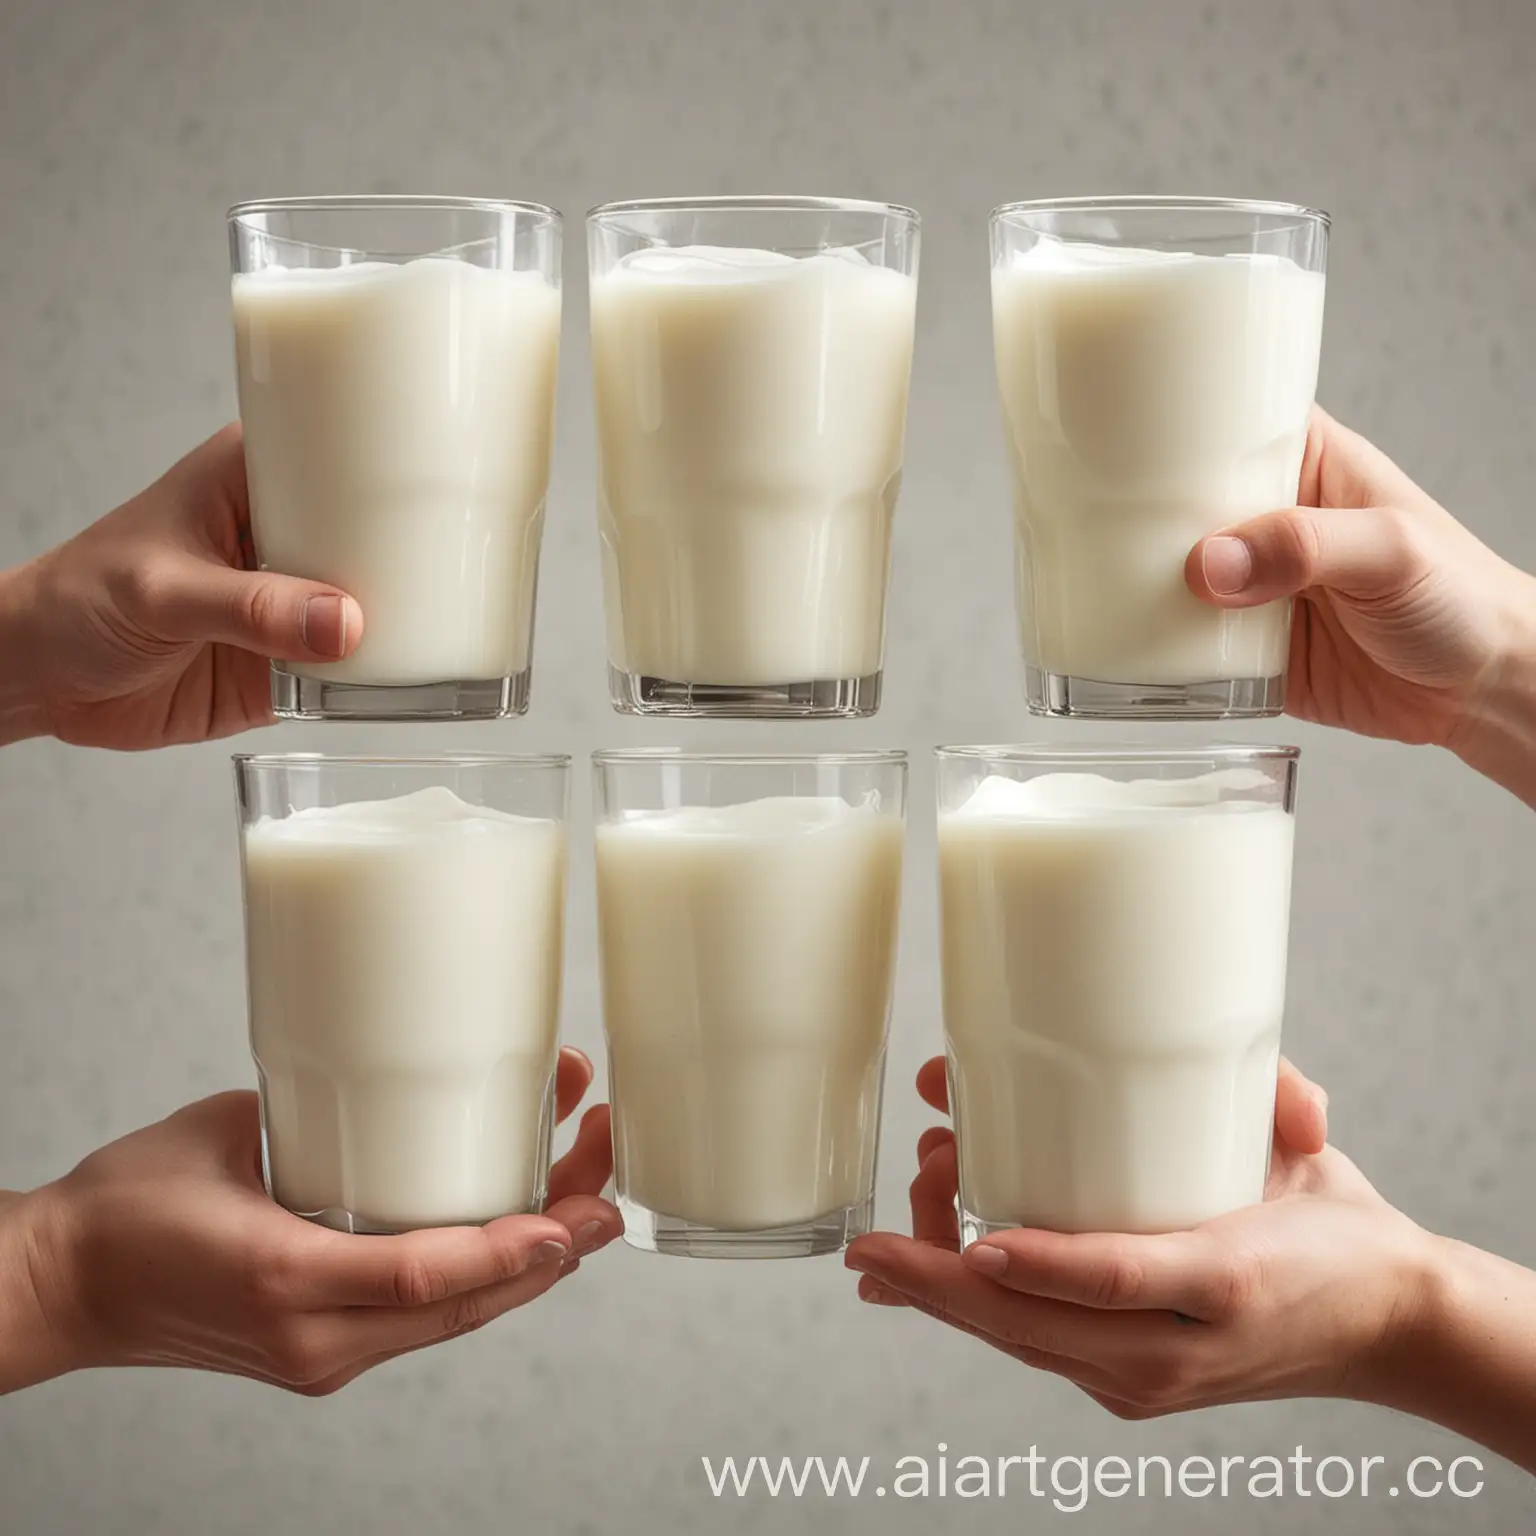 People-Clinking-Five-Glasses-of-Milk-in-Celebration